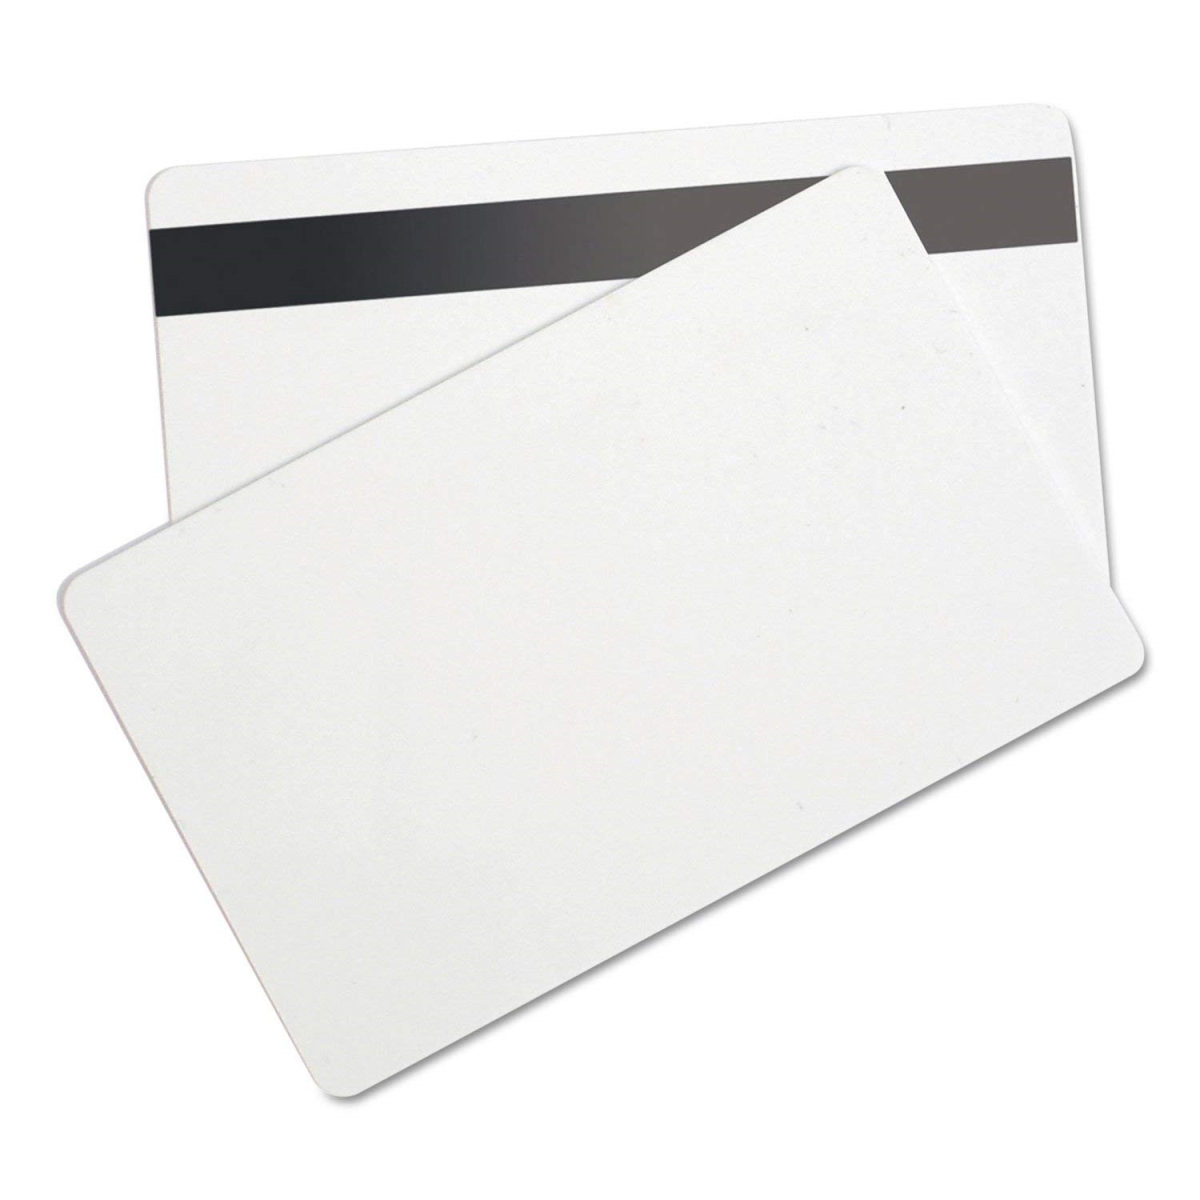 80340 2.12 X 3.37 In. Sicurix Blank Id Card With Magnetic Strip, White - 100 Per Pack